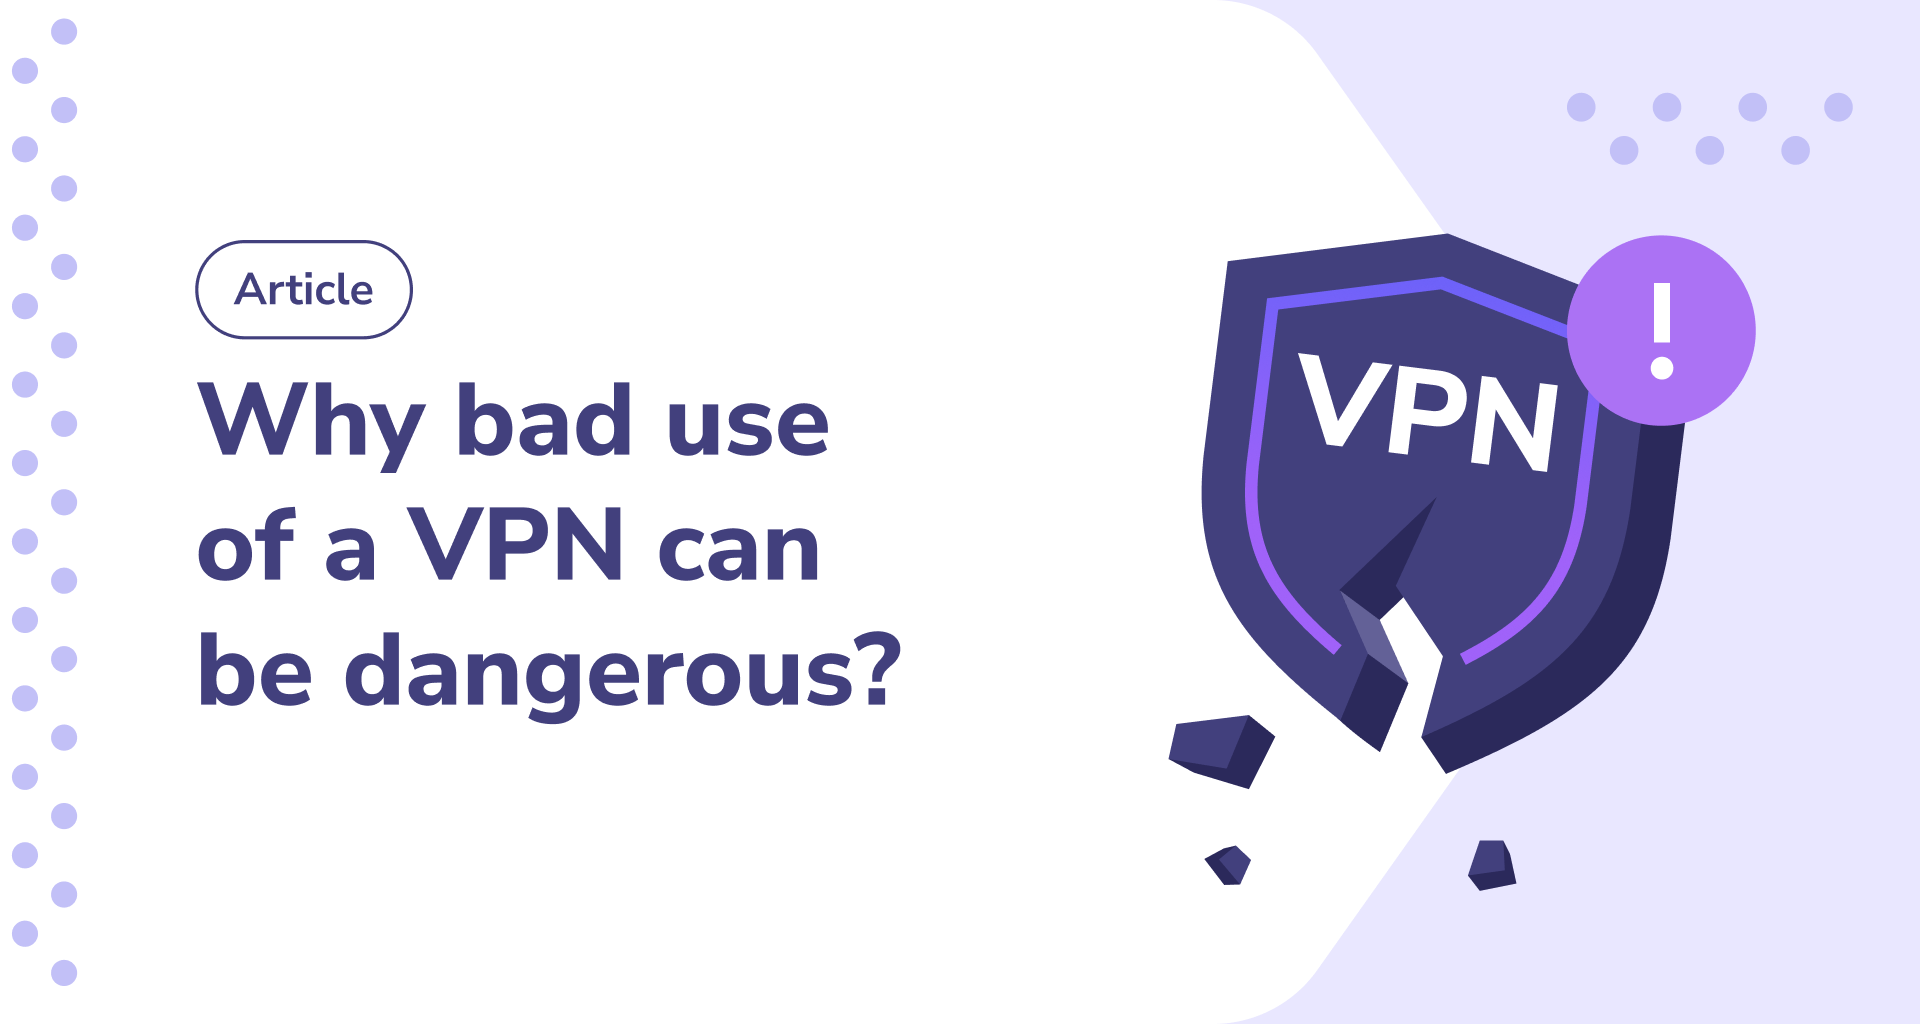 Secfense explains Why bad use of a VPN can be dangerous